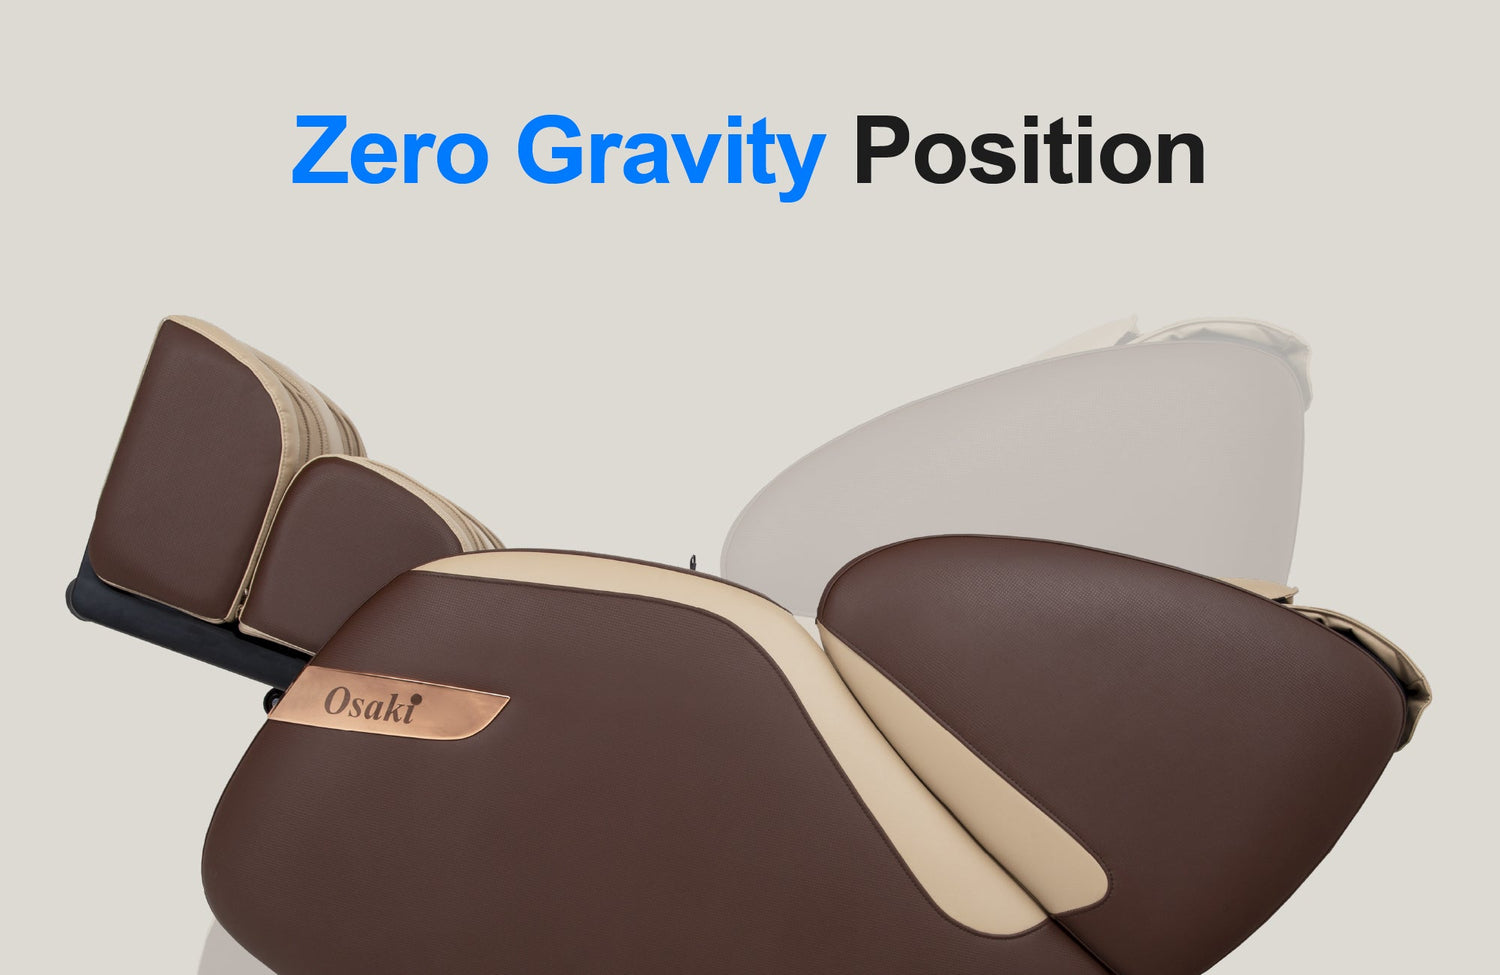 Osaki OS Champ features zero gravity where the knees are brought above the chest will optimize your blood flow.